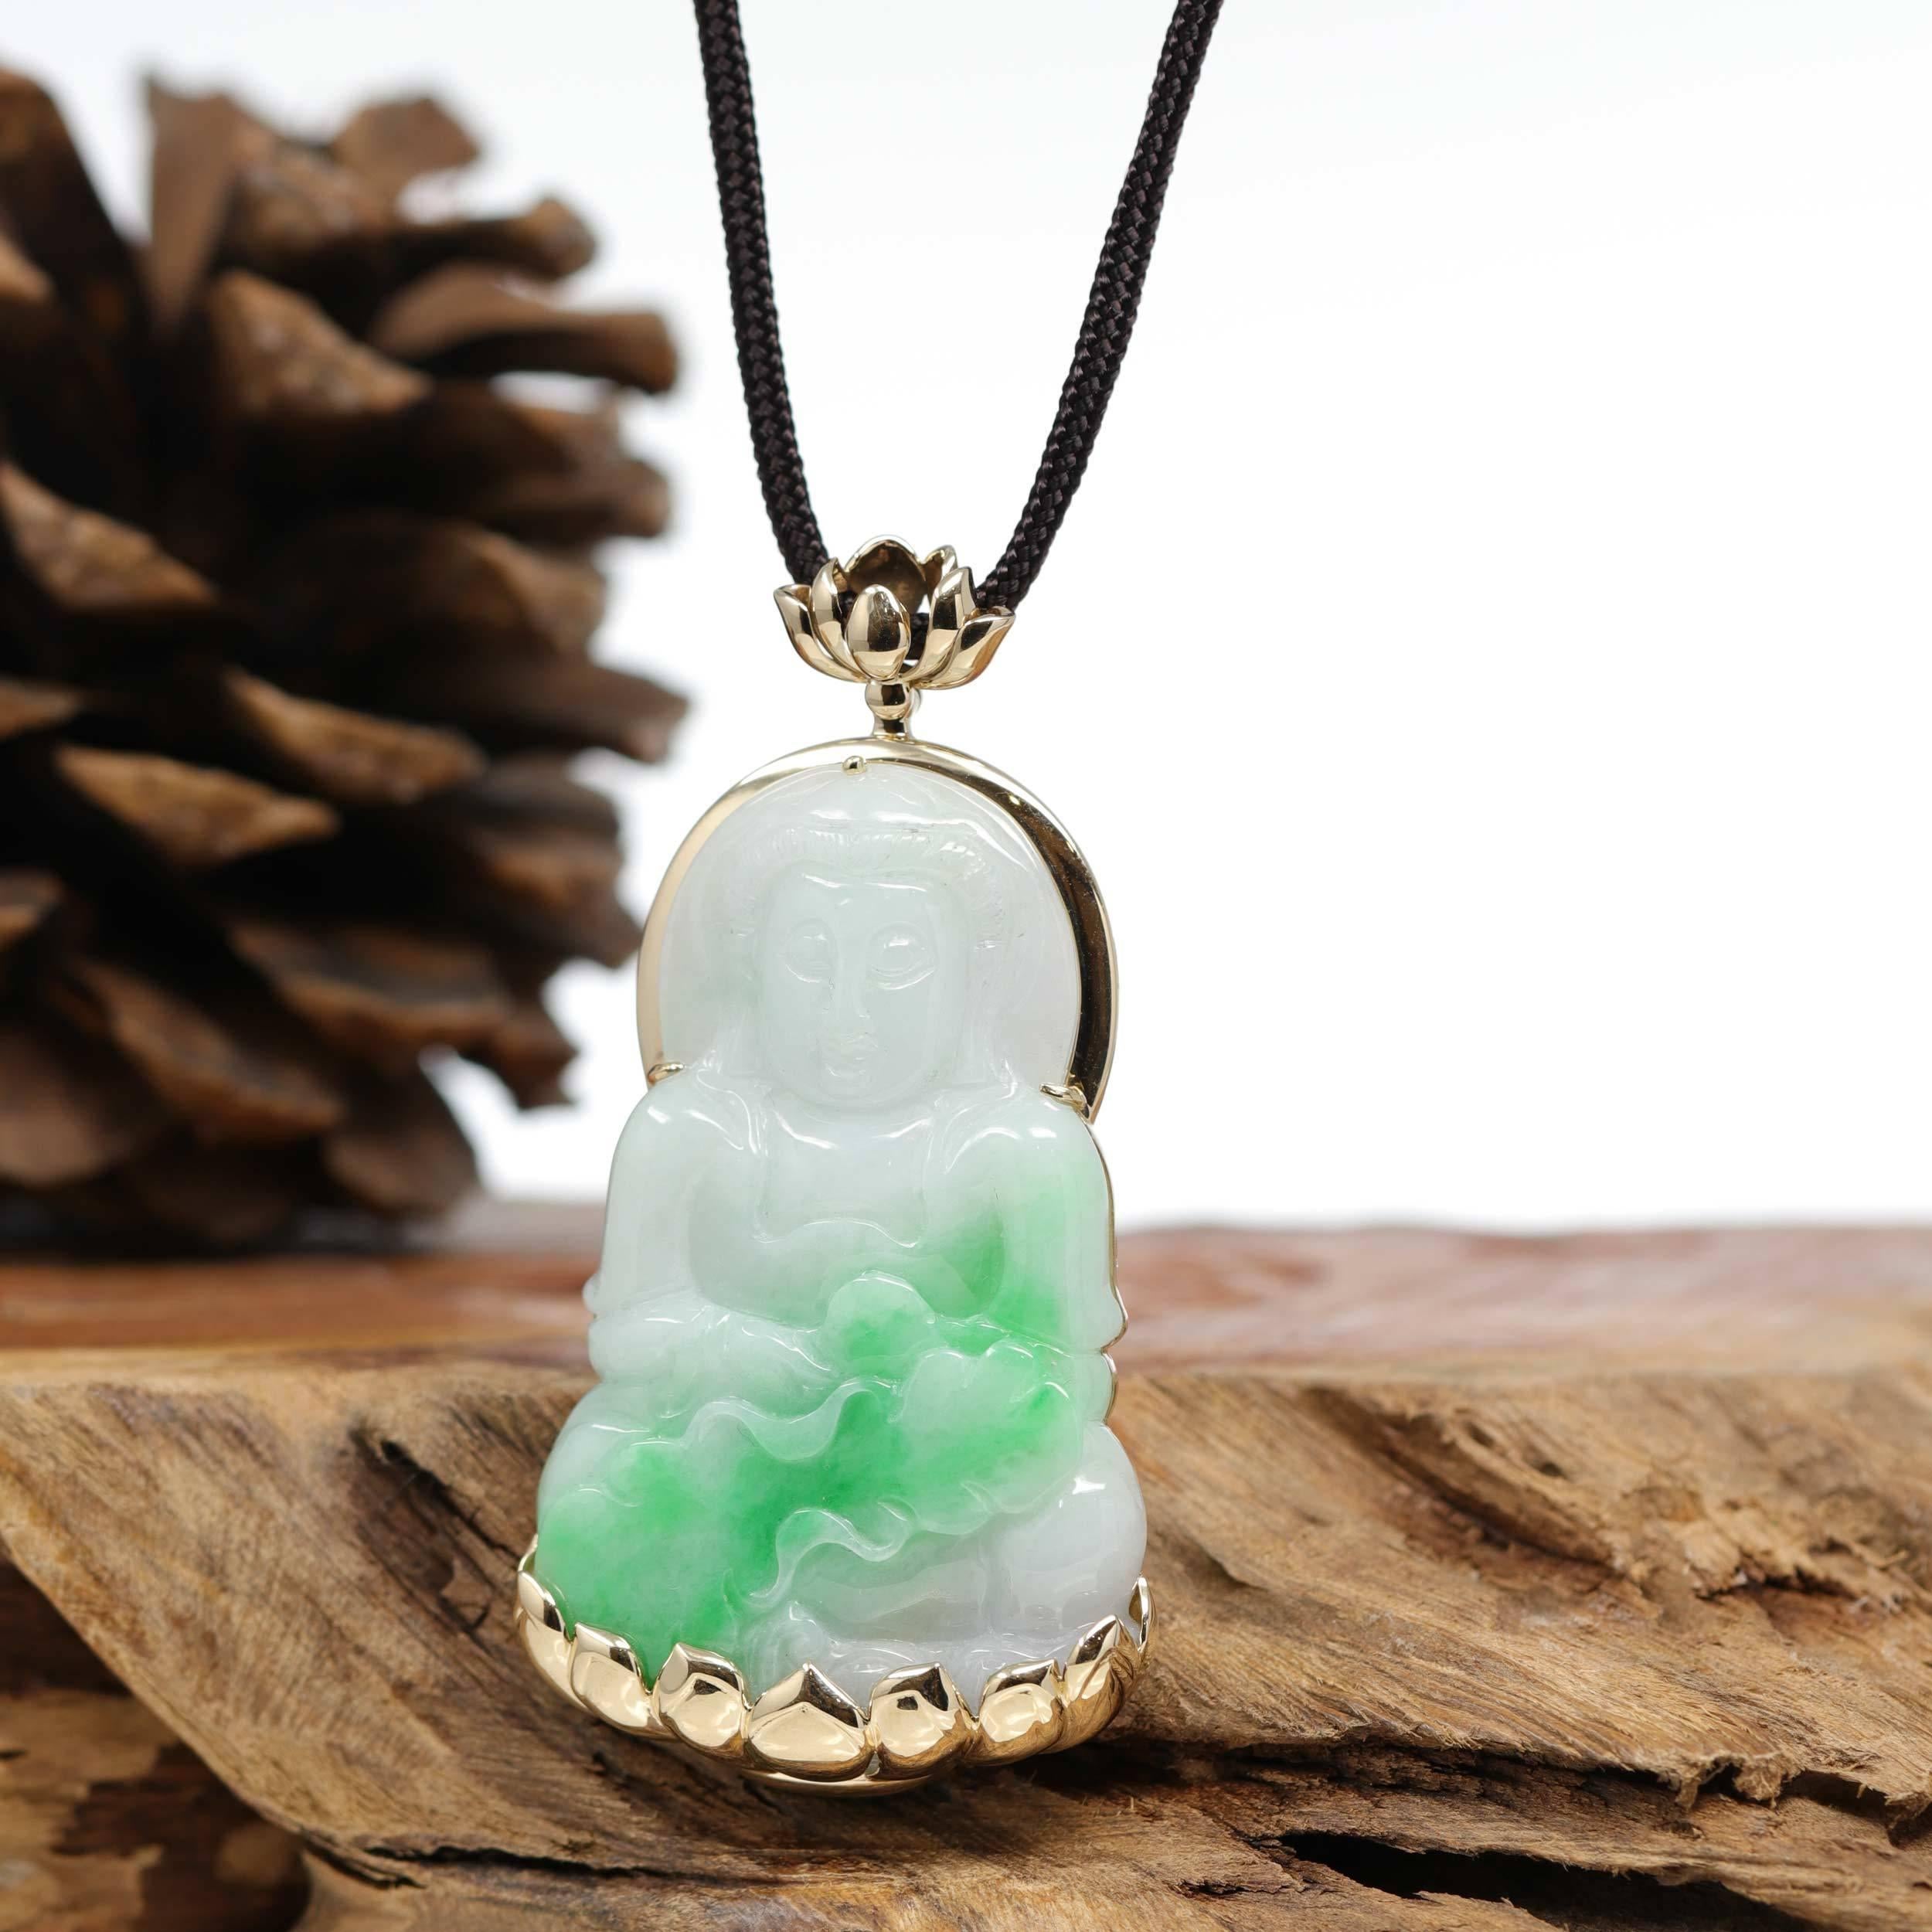 what does jade symbolize